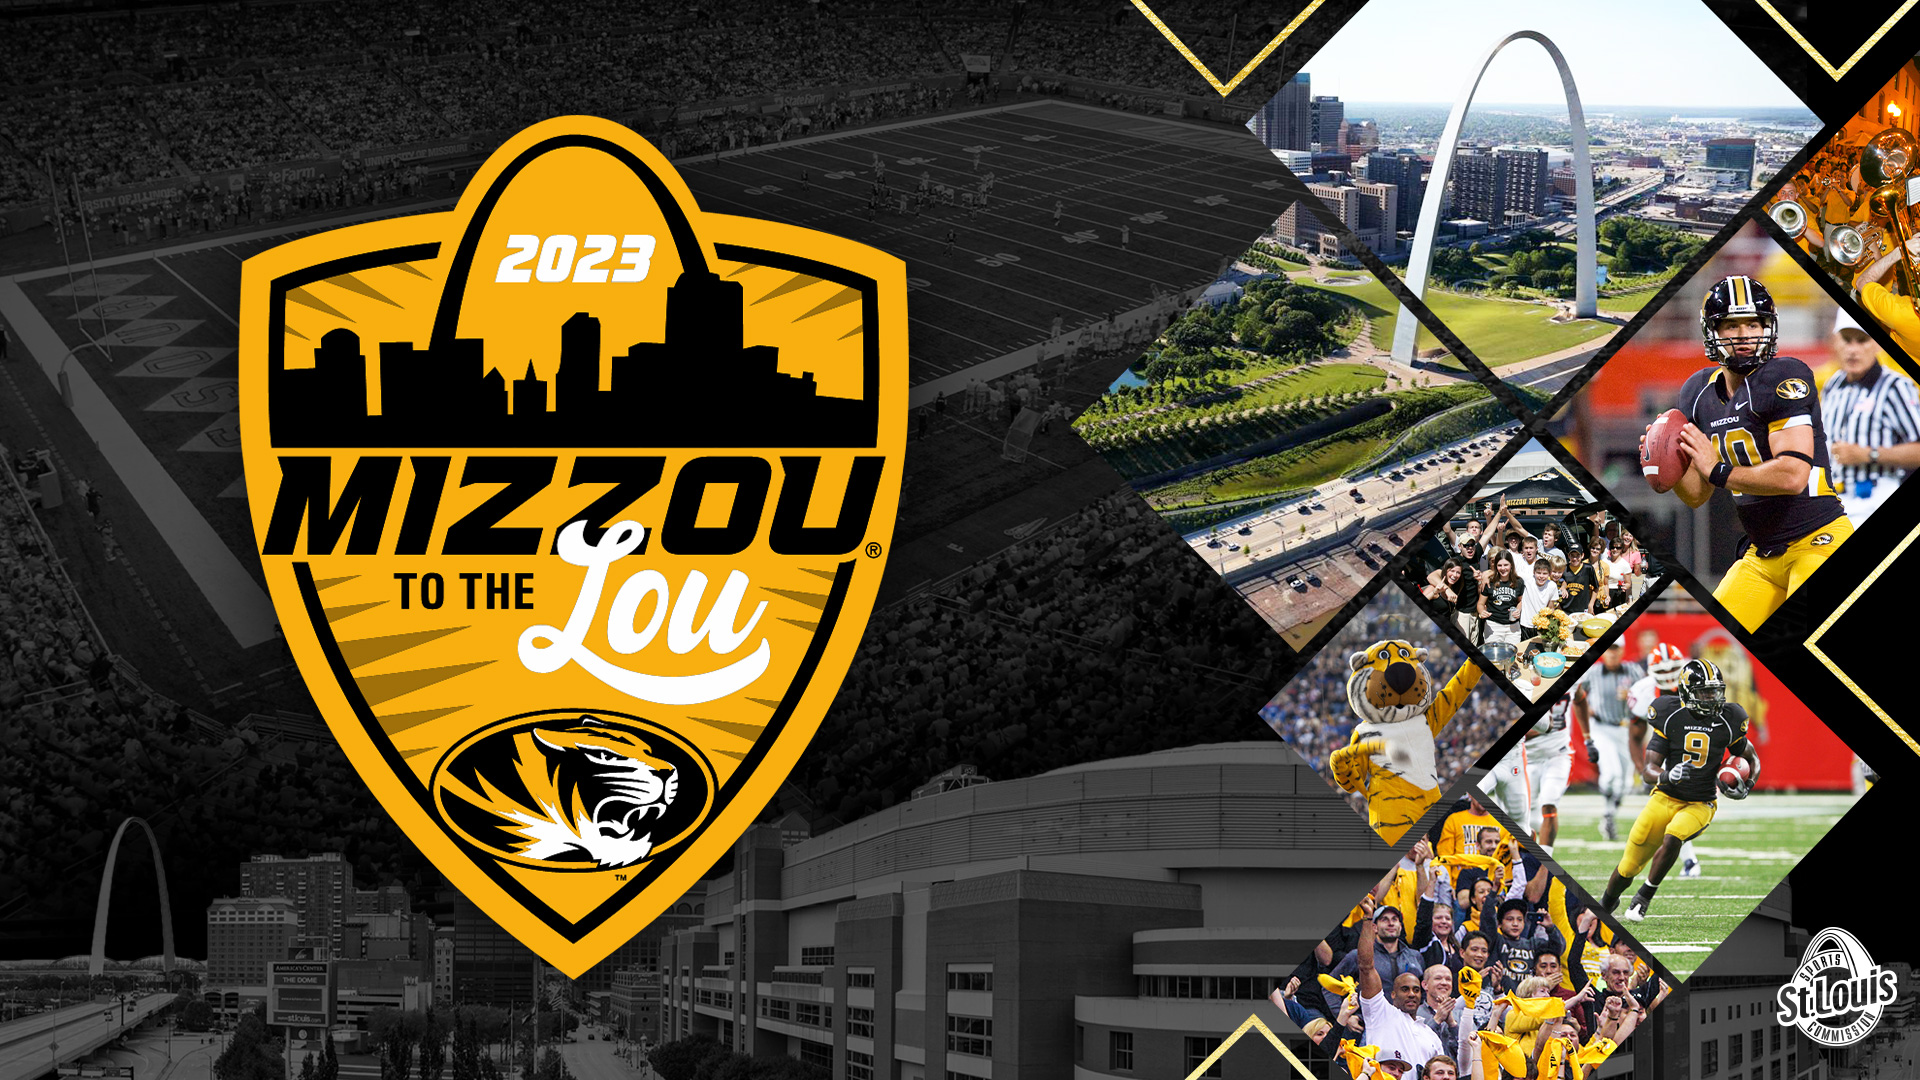 St. Louis Sports Commission Partners with University of Missouri to bring Mizzou Football and other sporting events back to St. Louis